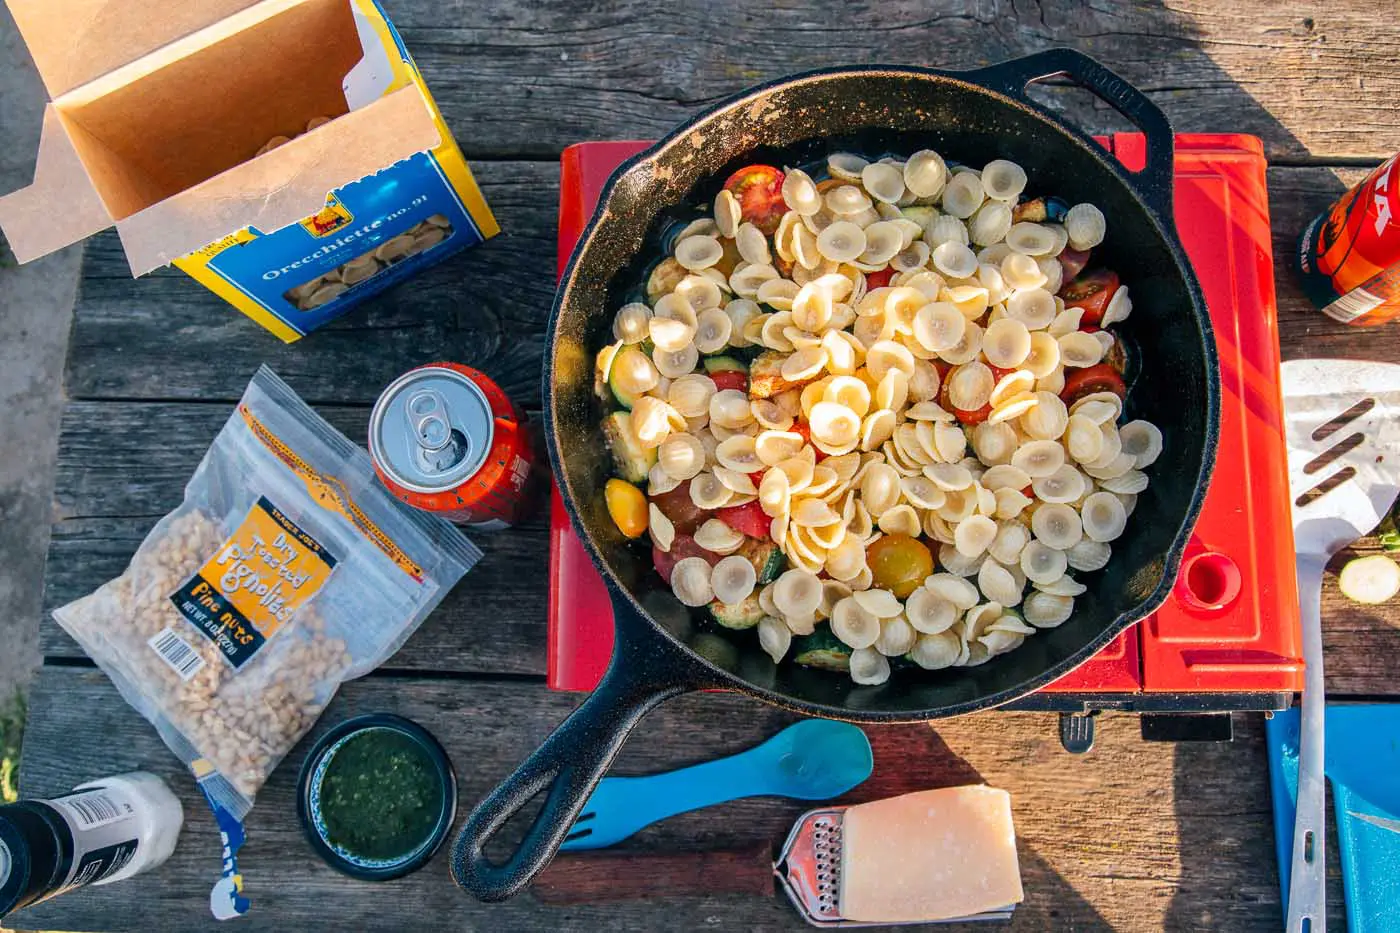 Overhead view of pasta in a cast iron skillet on a camping stove. Other pasta ingredients such as cheese, pesto, and pine nuts are on the table.